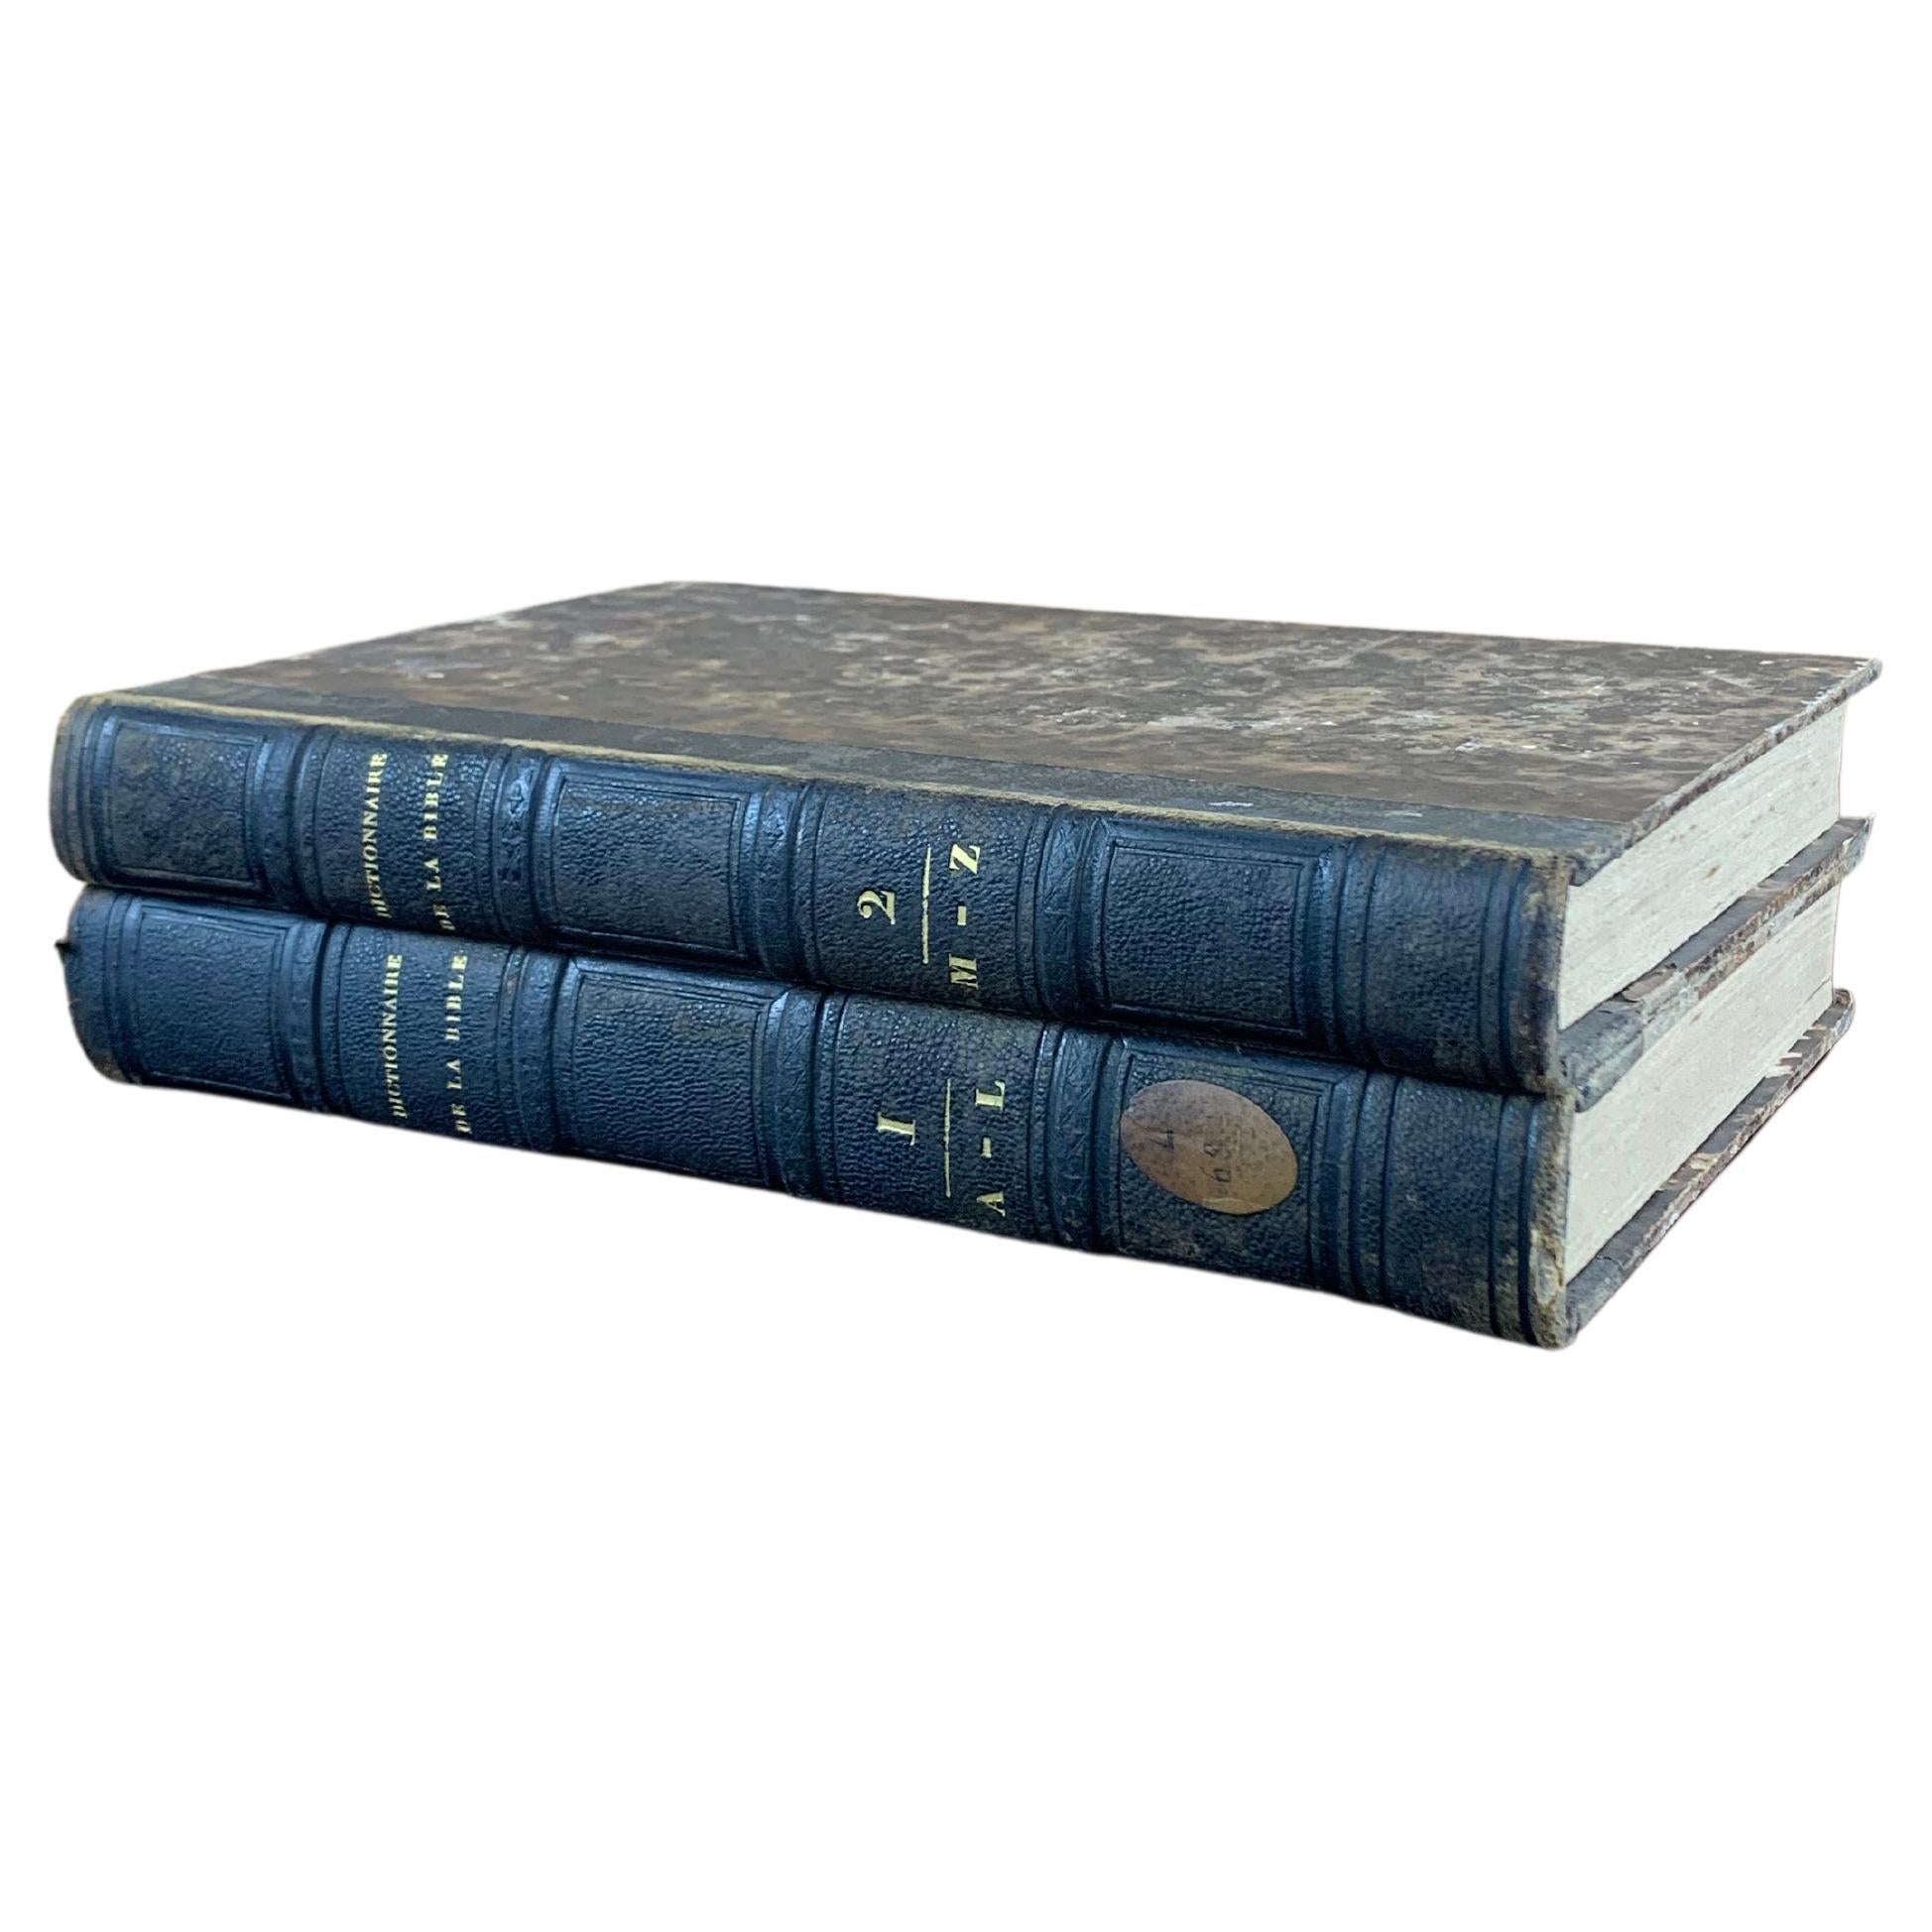 Antique French Books - 13 For Sale on 1stDibs | old french books